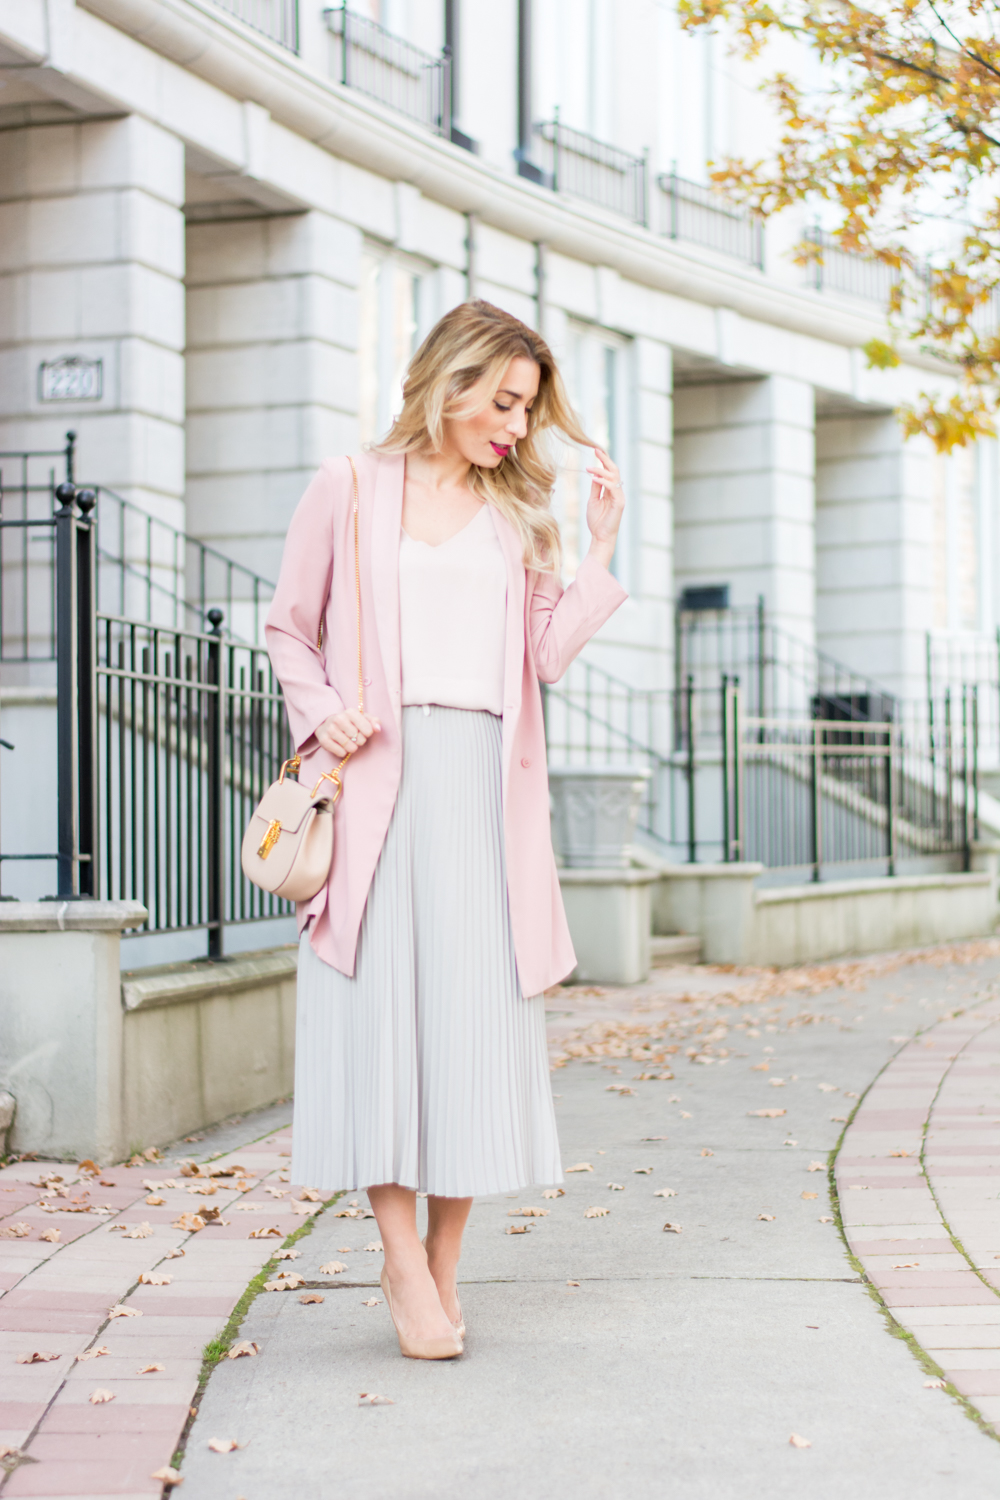 OOTD - I'm Not Giving Up My Skirts | La Petite Noob | A Toronto-Based ...